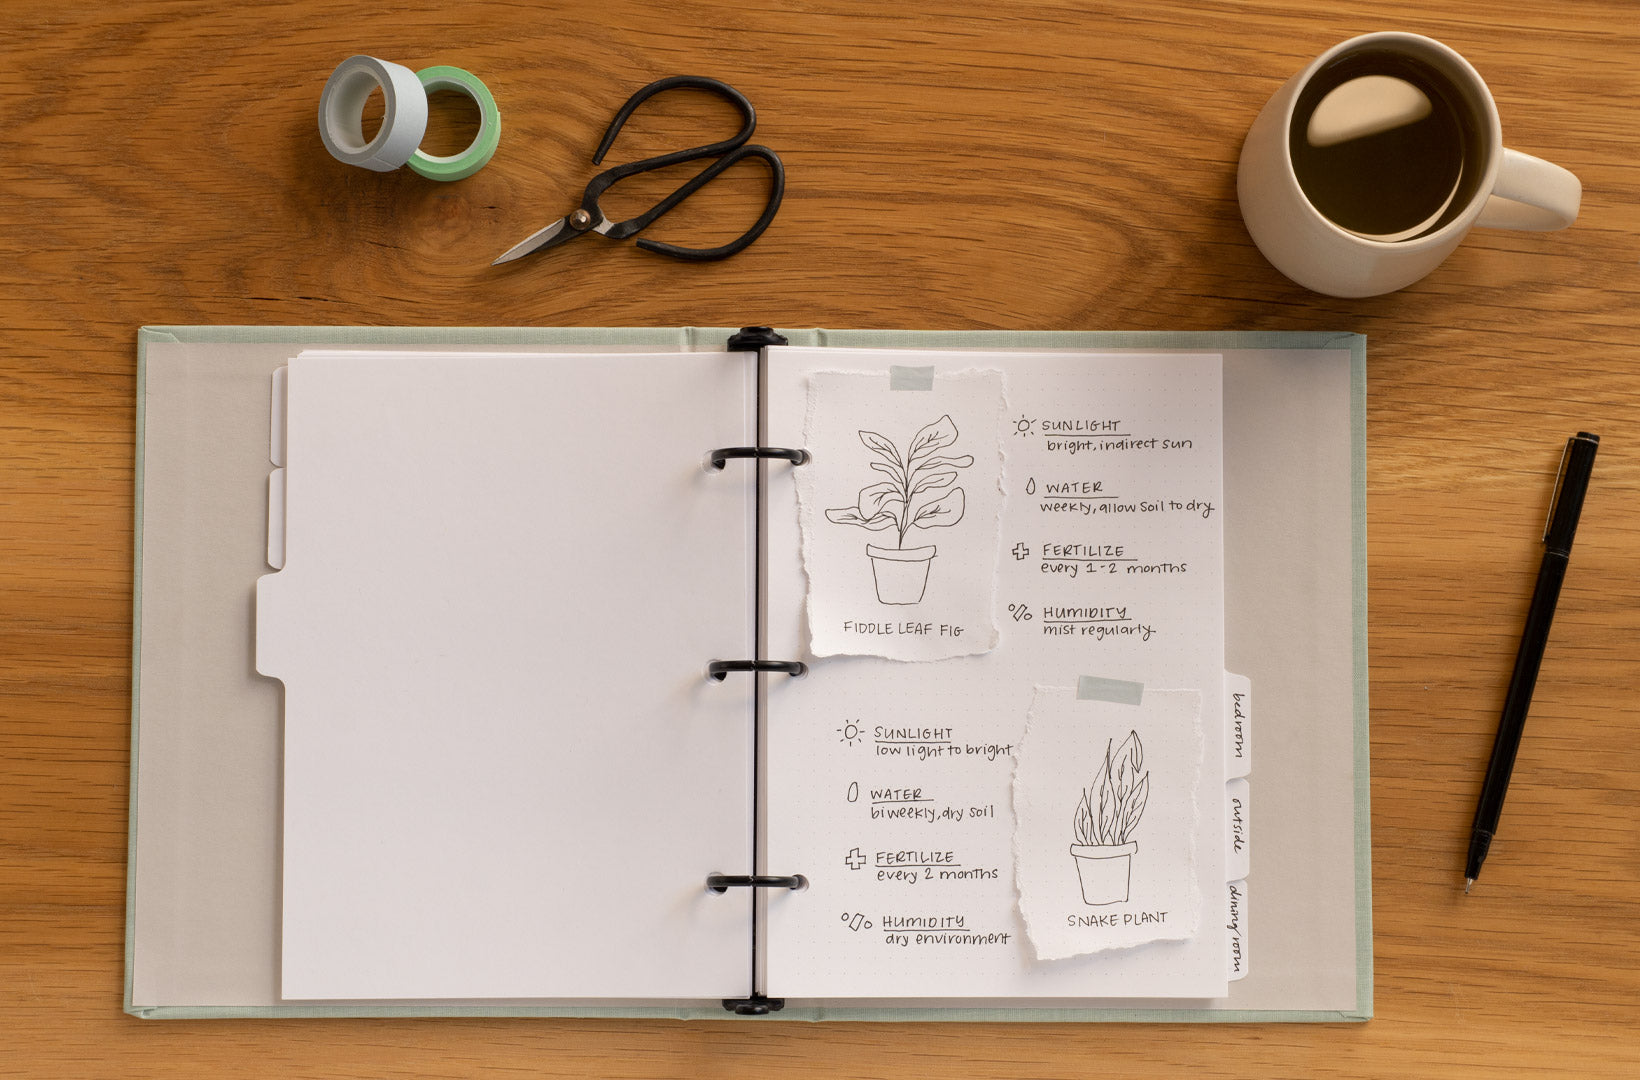 The Compact Binder lies open on a wood desk. The right-hand side of the dot-grid pages show sketched images of house plants and a plant-tracker. Tape shears, and a pen, and a cup of coffee are strewn across the image.